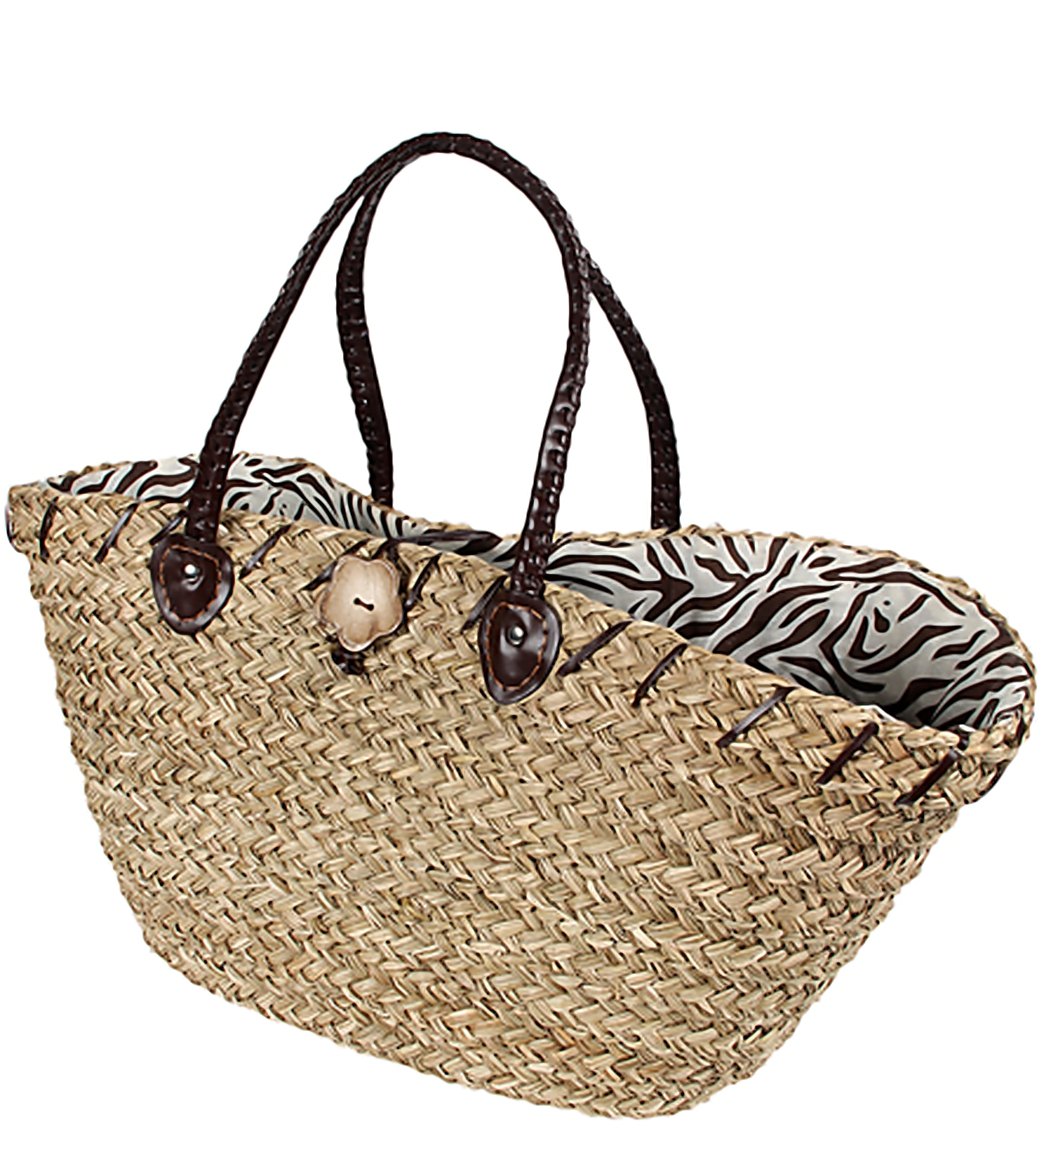 Sun N Sand Sablewood Oversized Tote Beach Bag at SwimOutlet.com